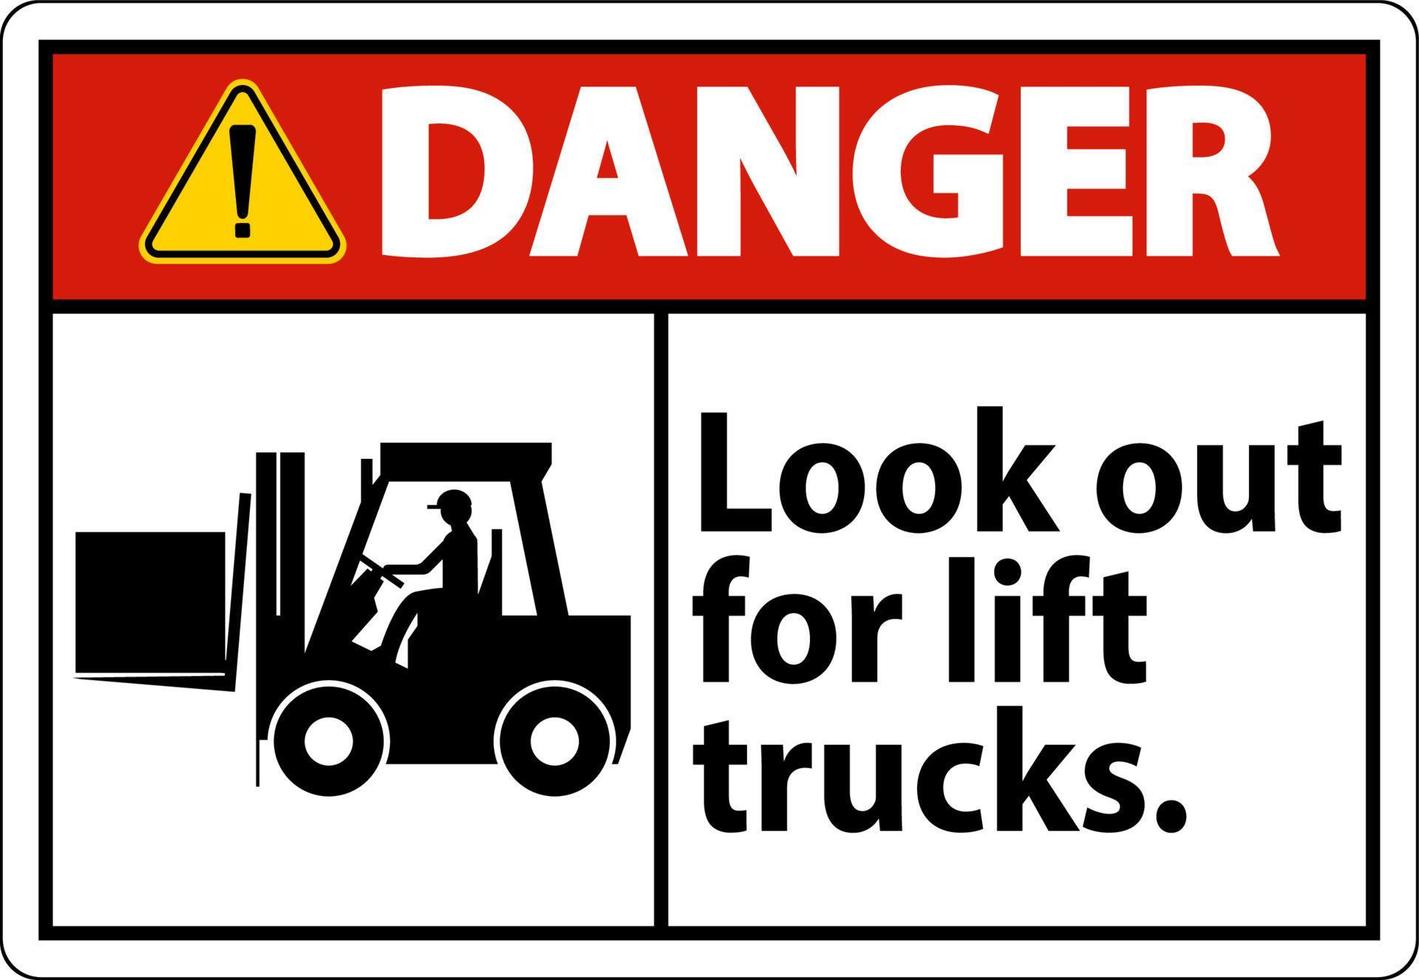 Danger Look Out For Lift Trucks Sign On White Background vector